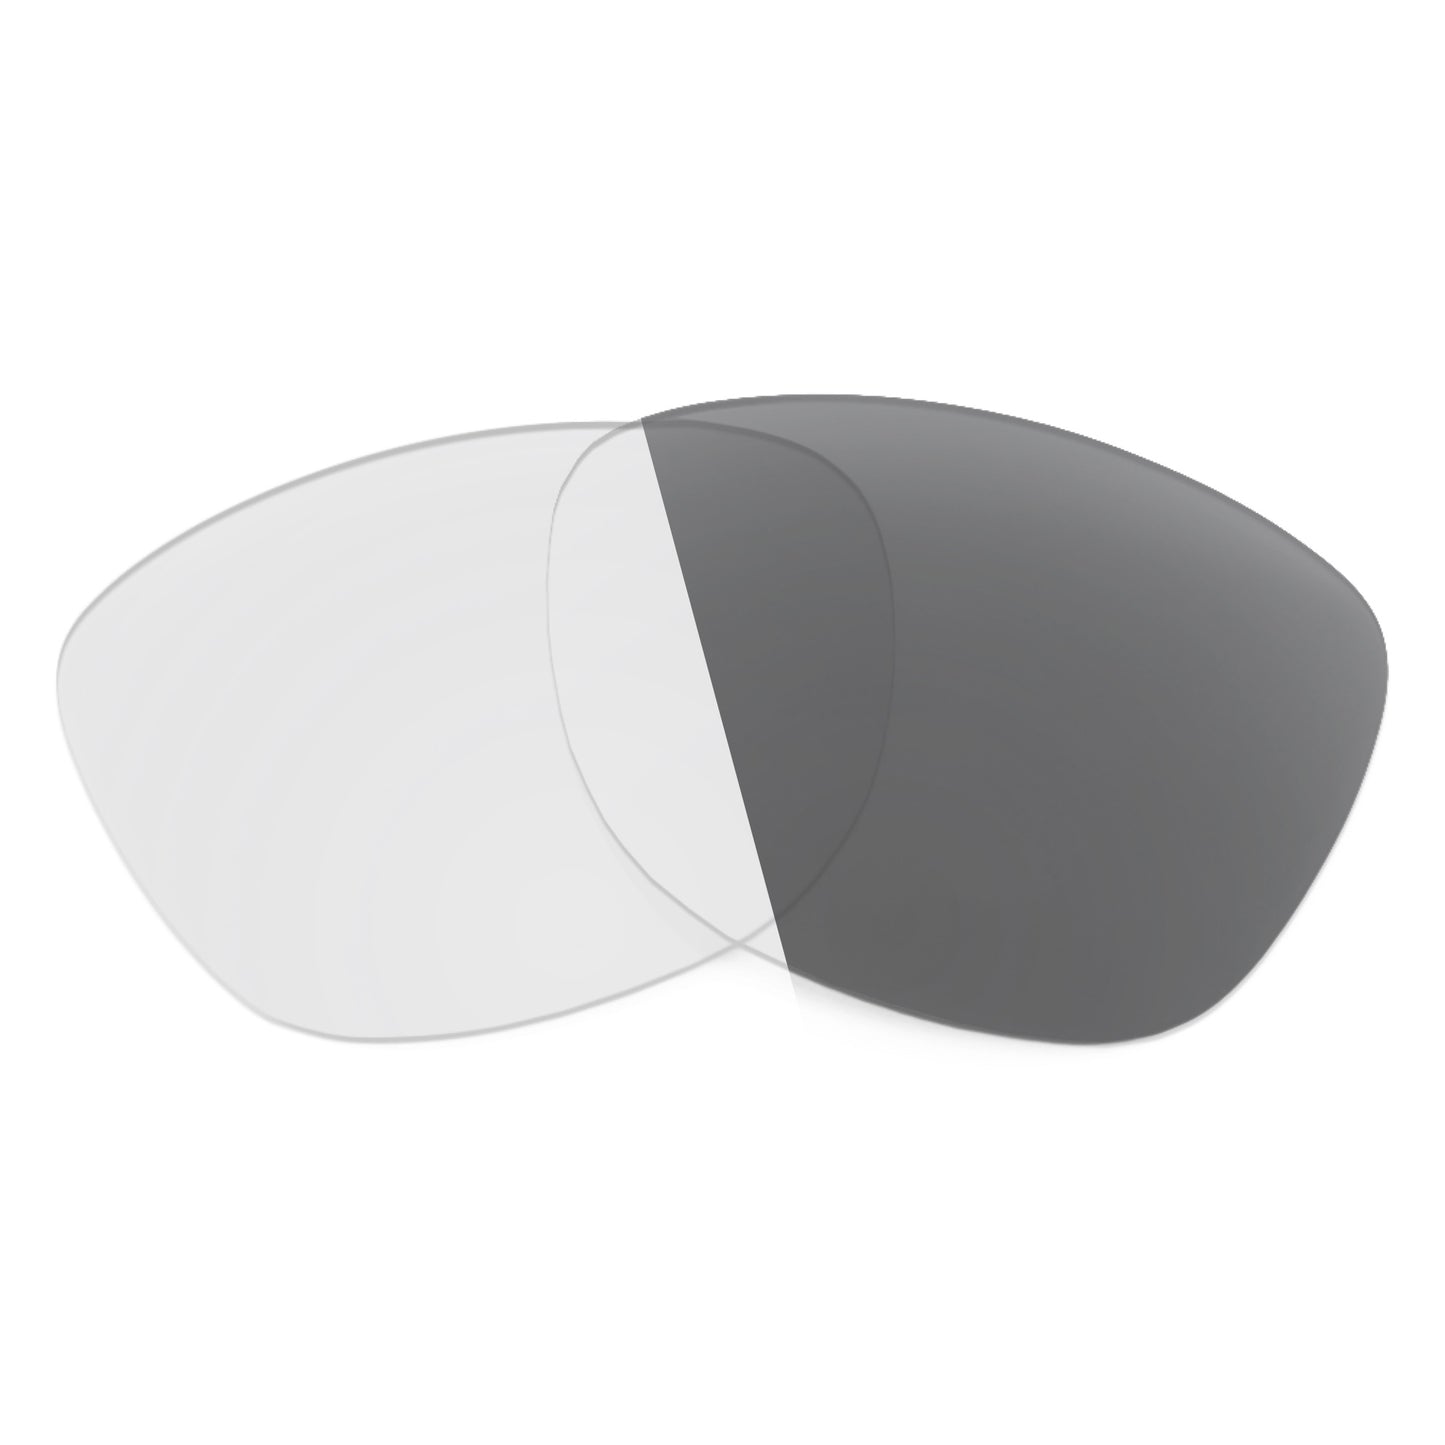 Revant replacement lenses for Costa Tybee Non-Polarized Adapt Gray Photochromic